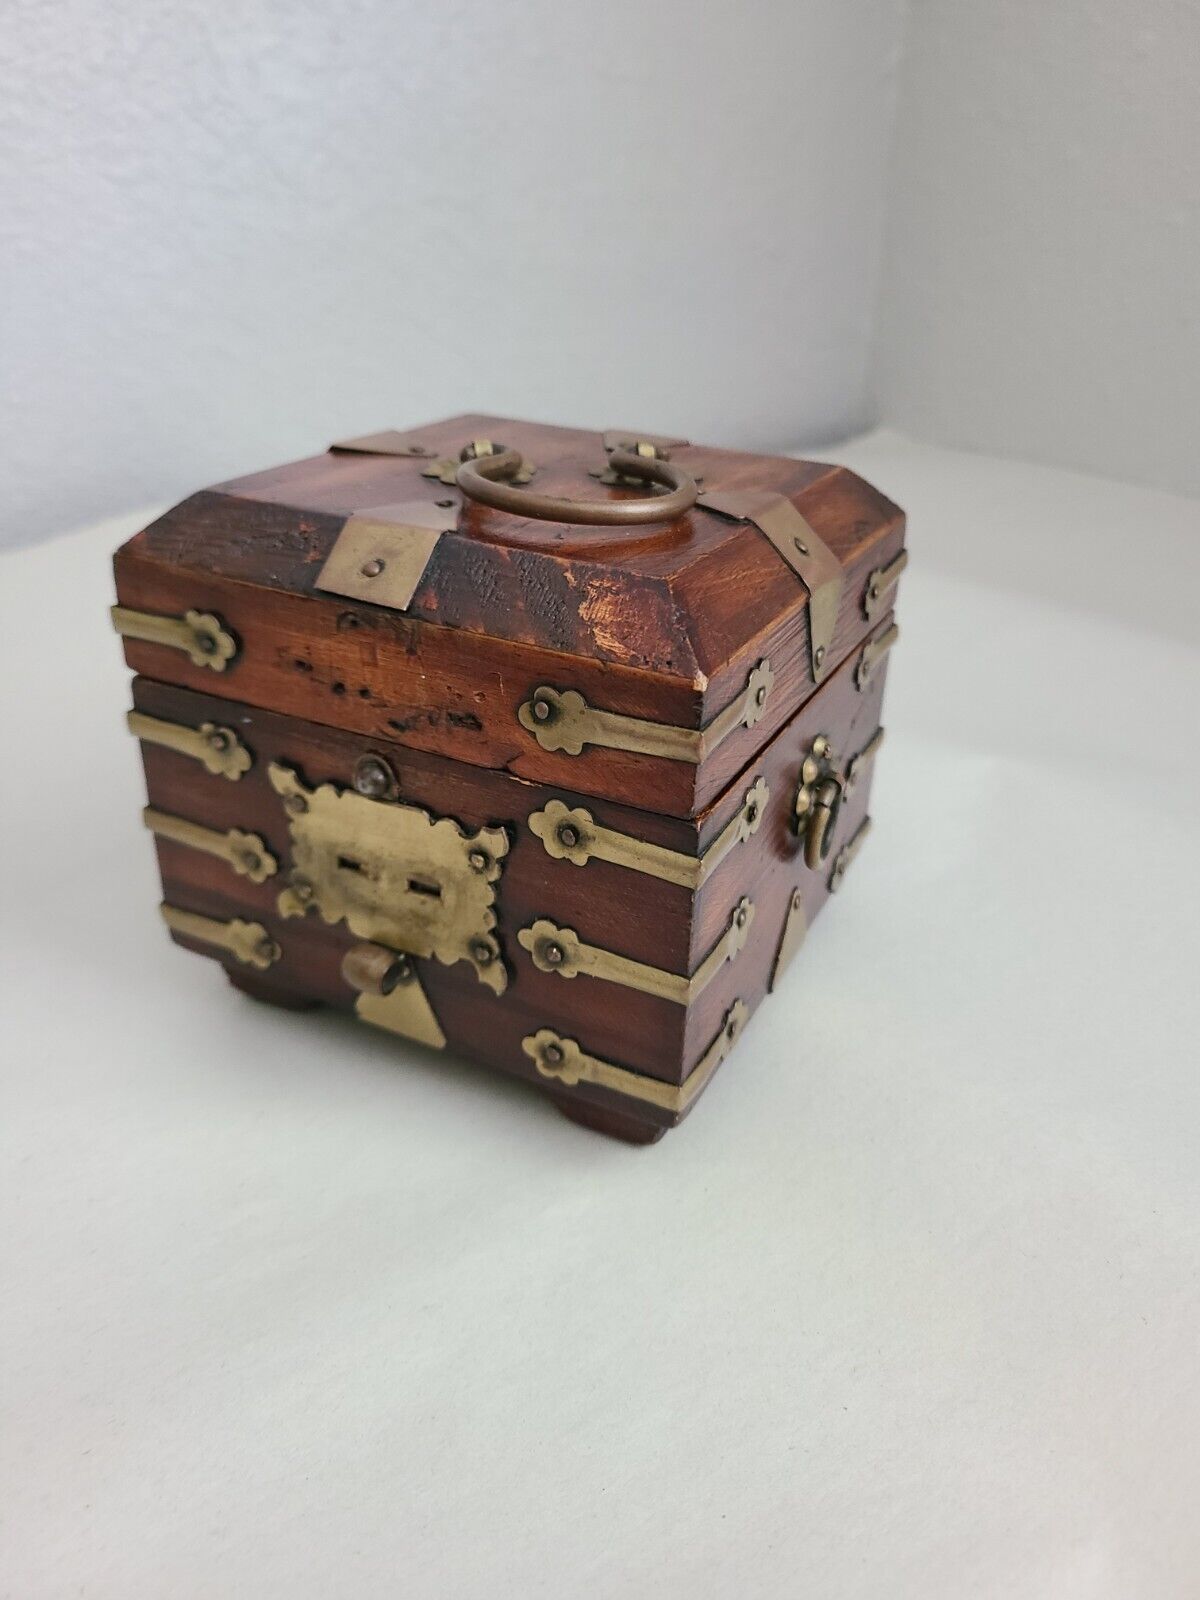 Vintage Chinese Wood and Brass Square Jewelry Box, Missing The Lock Lutch/haspr